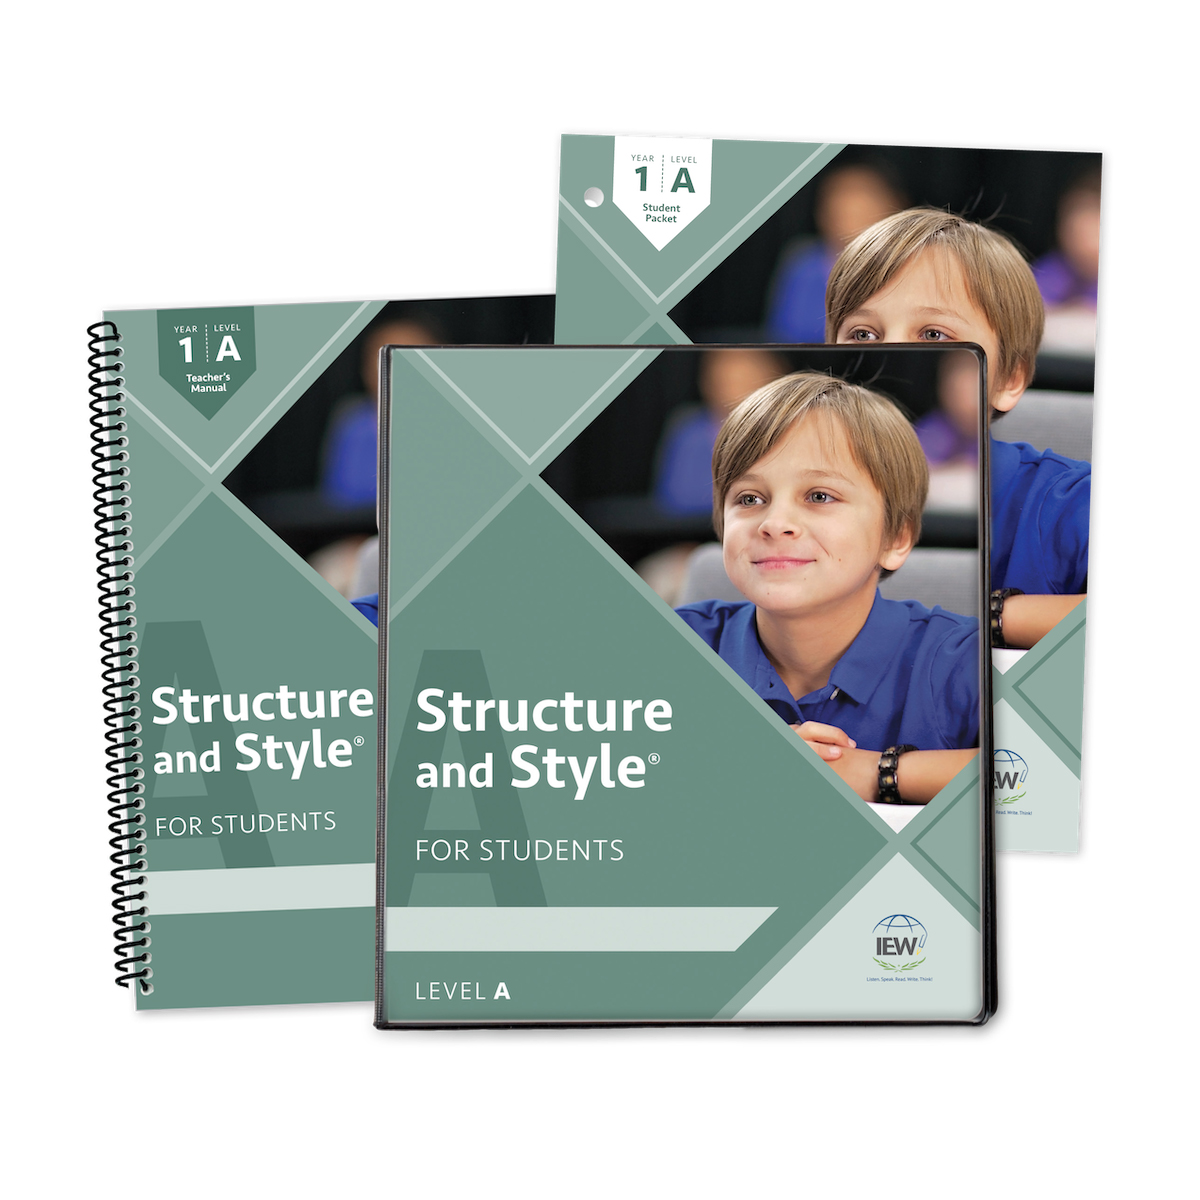 Structure and Style for Students: Year 1 Level A [Binder, Student Packet, Teacher's Manual]